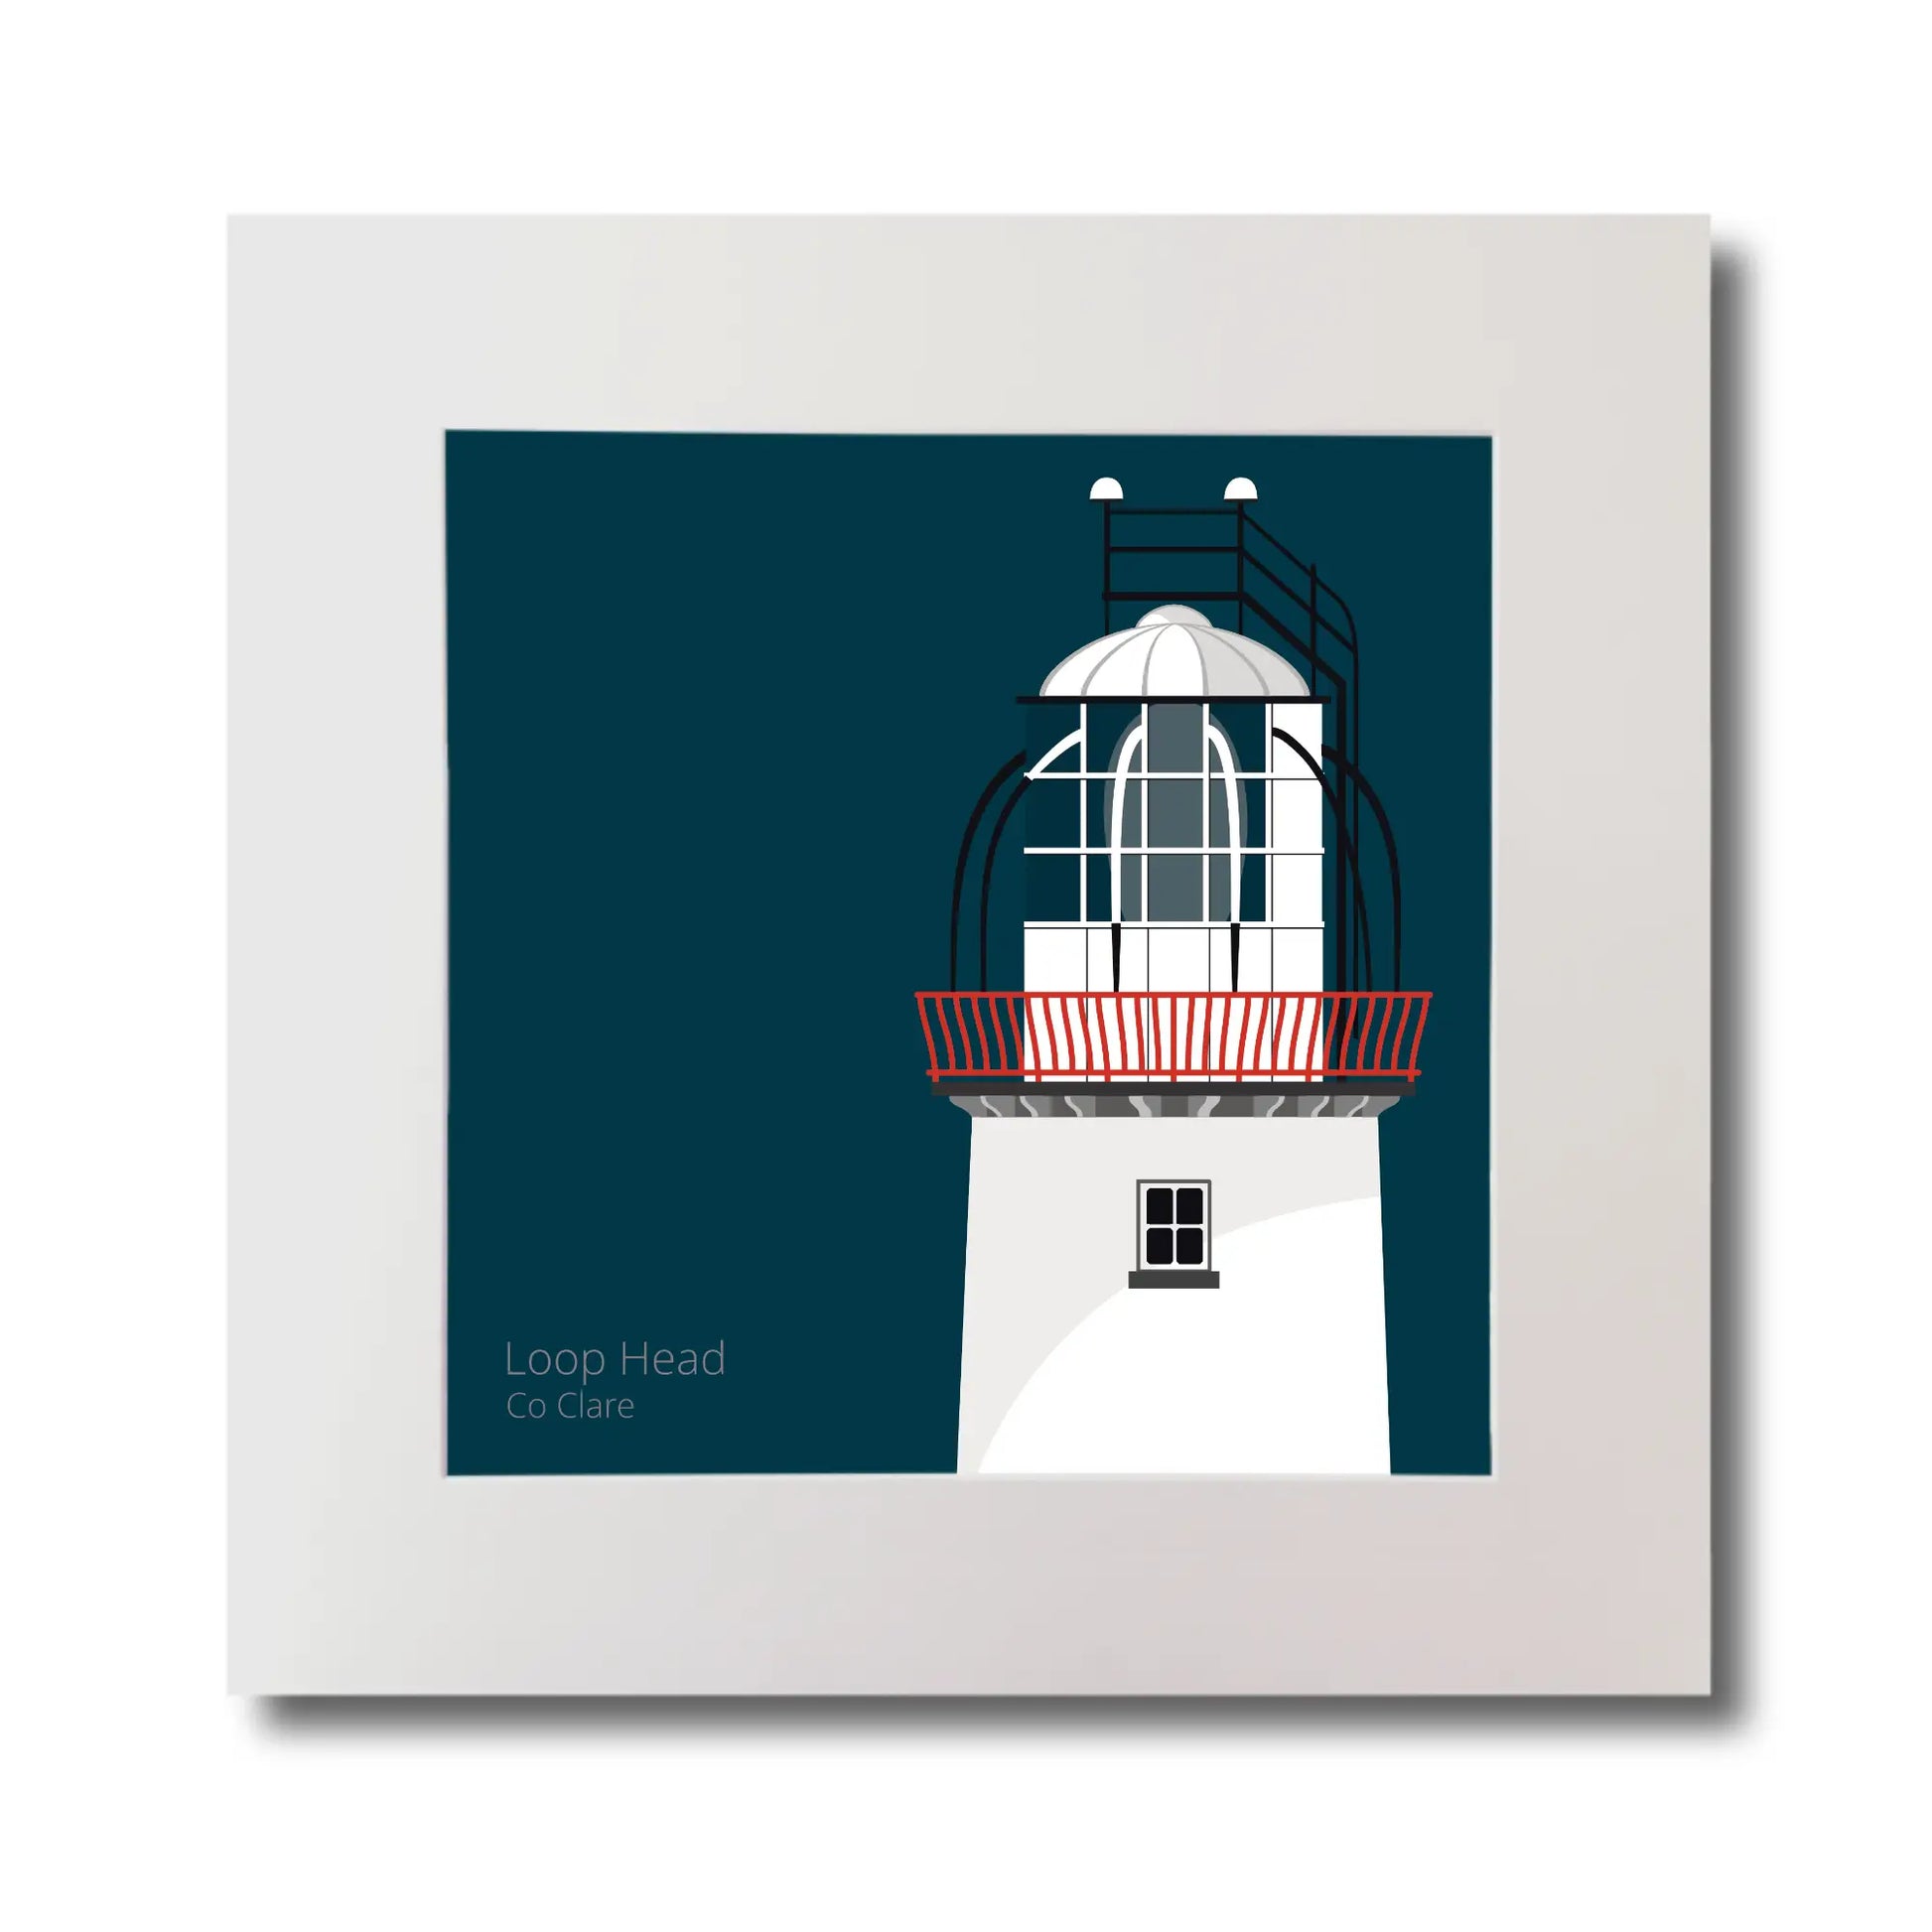 Illustration of Loop Head lighthouse on a midnight blue background, mounted and measuring 30x30cm.